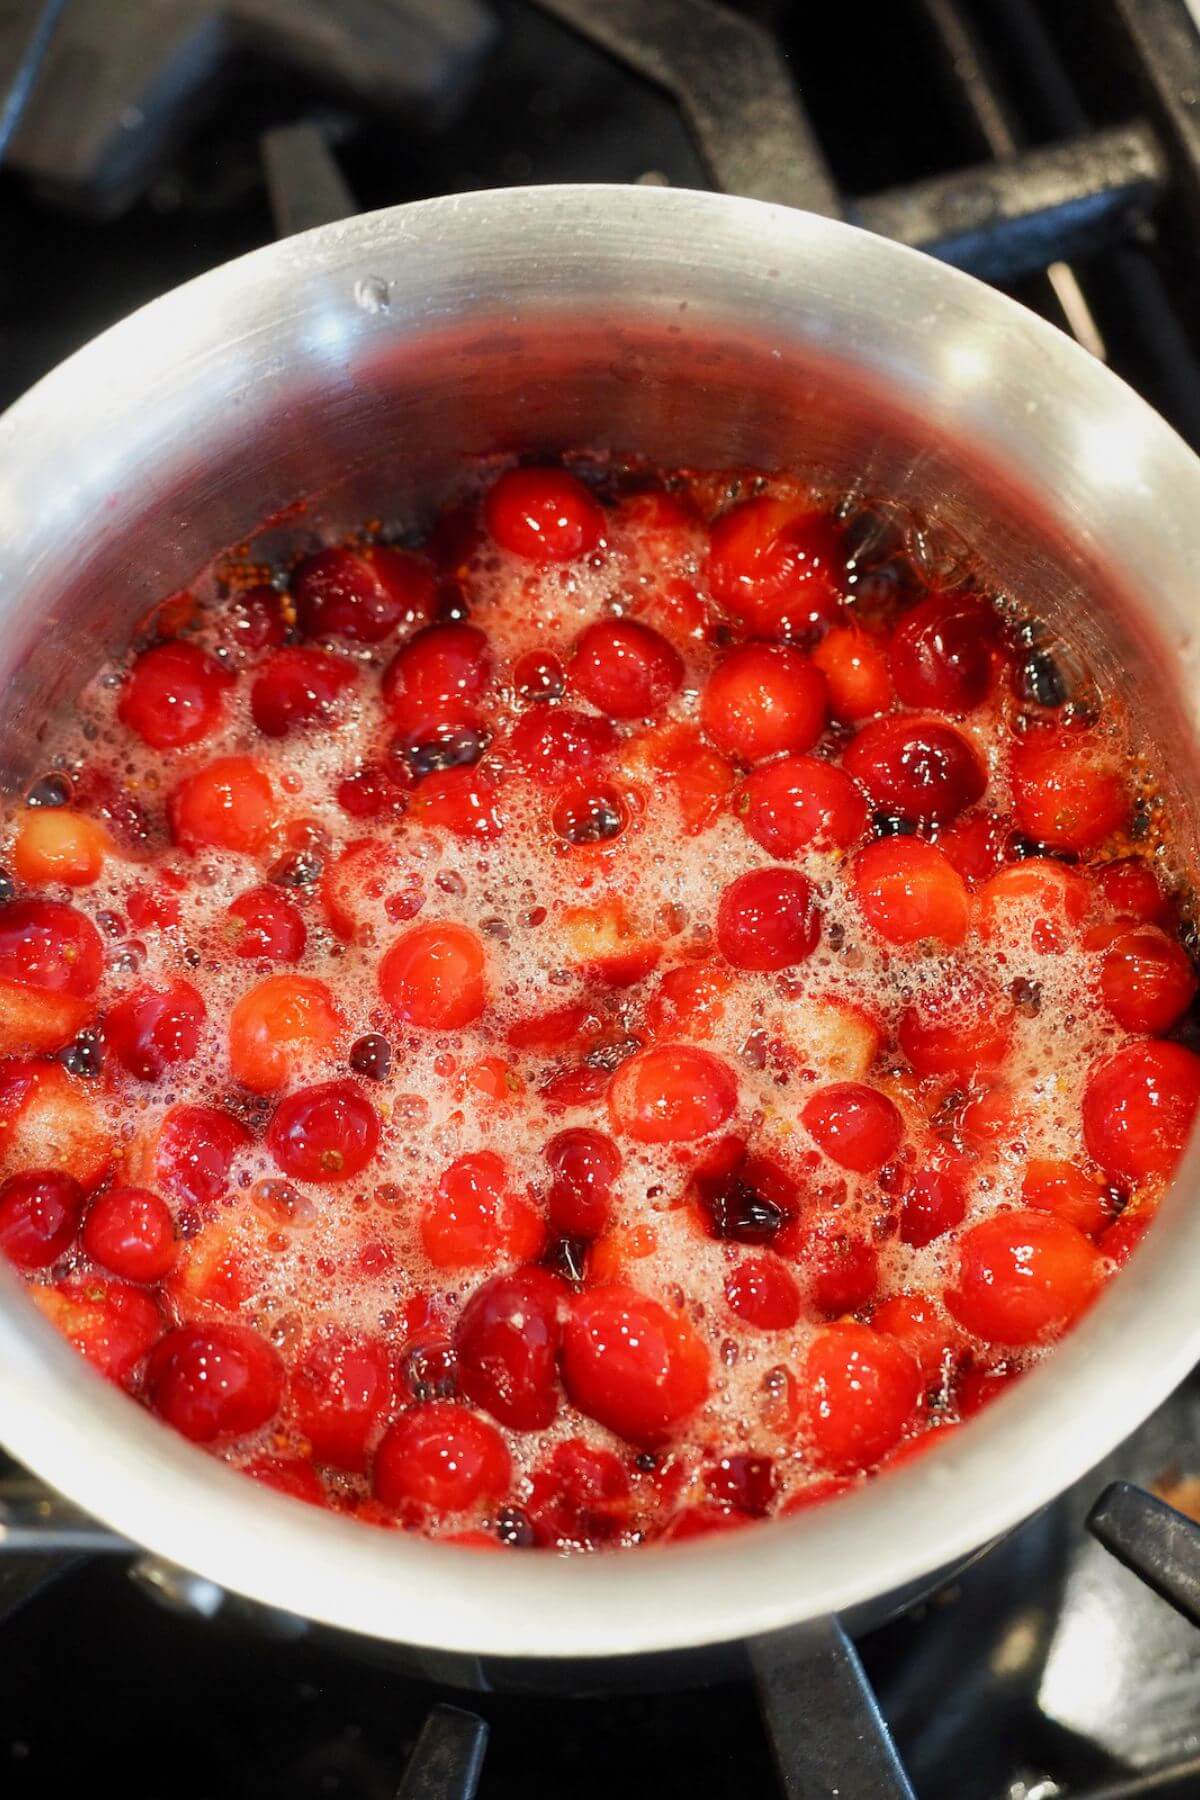 Simmering cranberries on stovetop, cranberries bursting for homemade cranberry sauce.